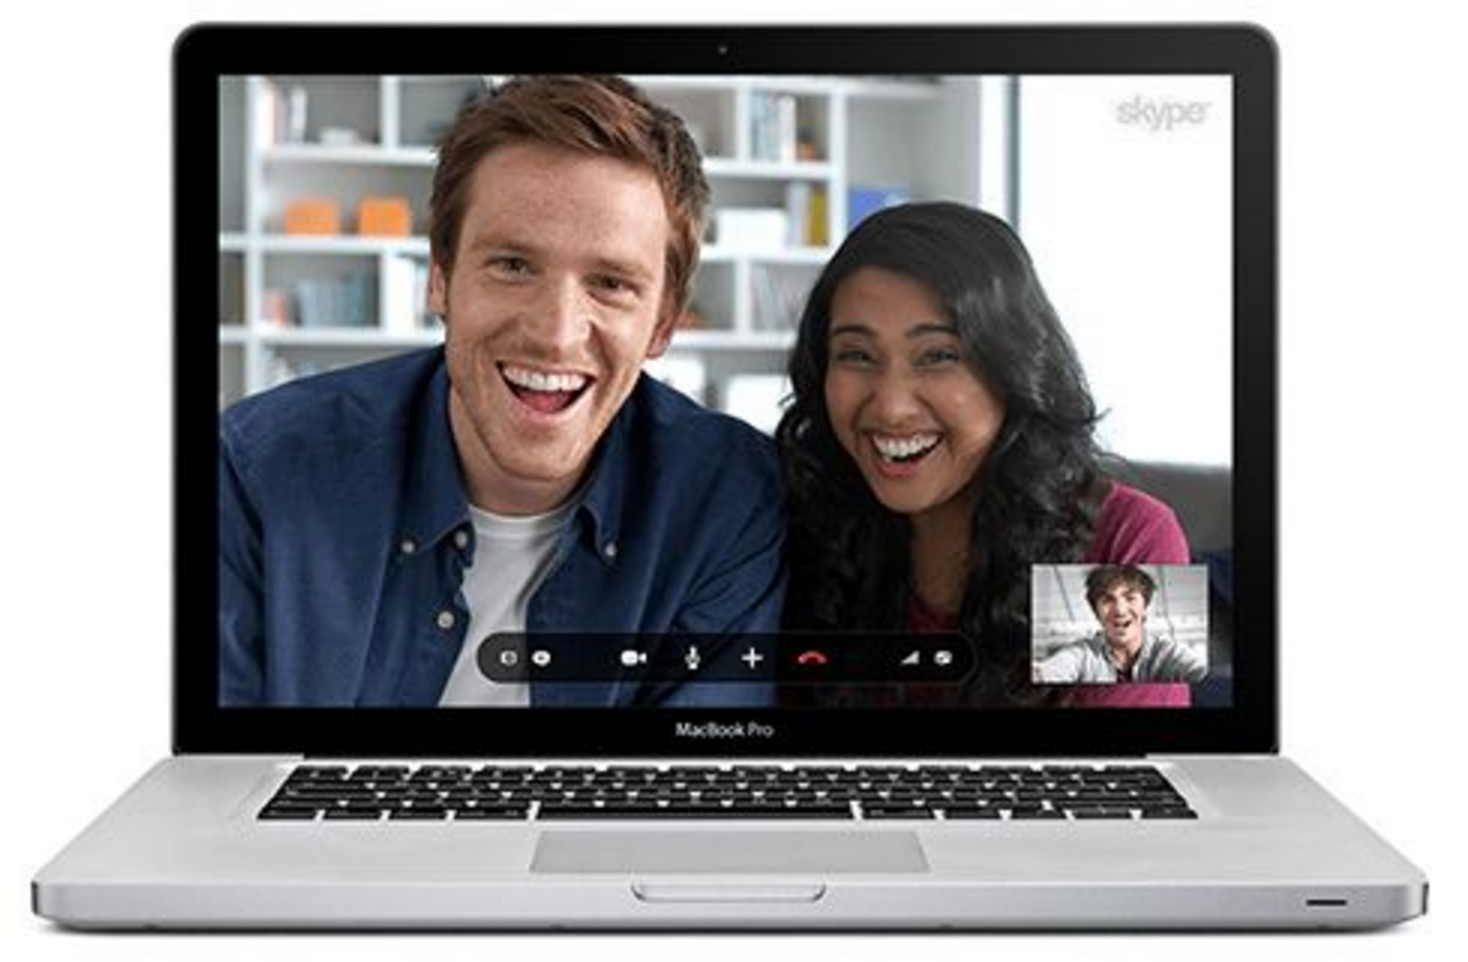 Google Hangouts video conferencing from chat screen shot